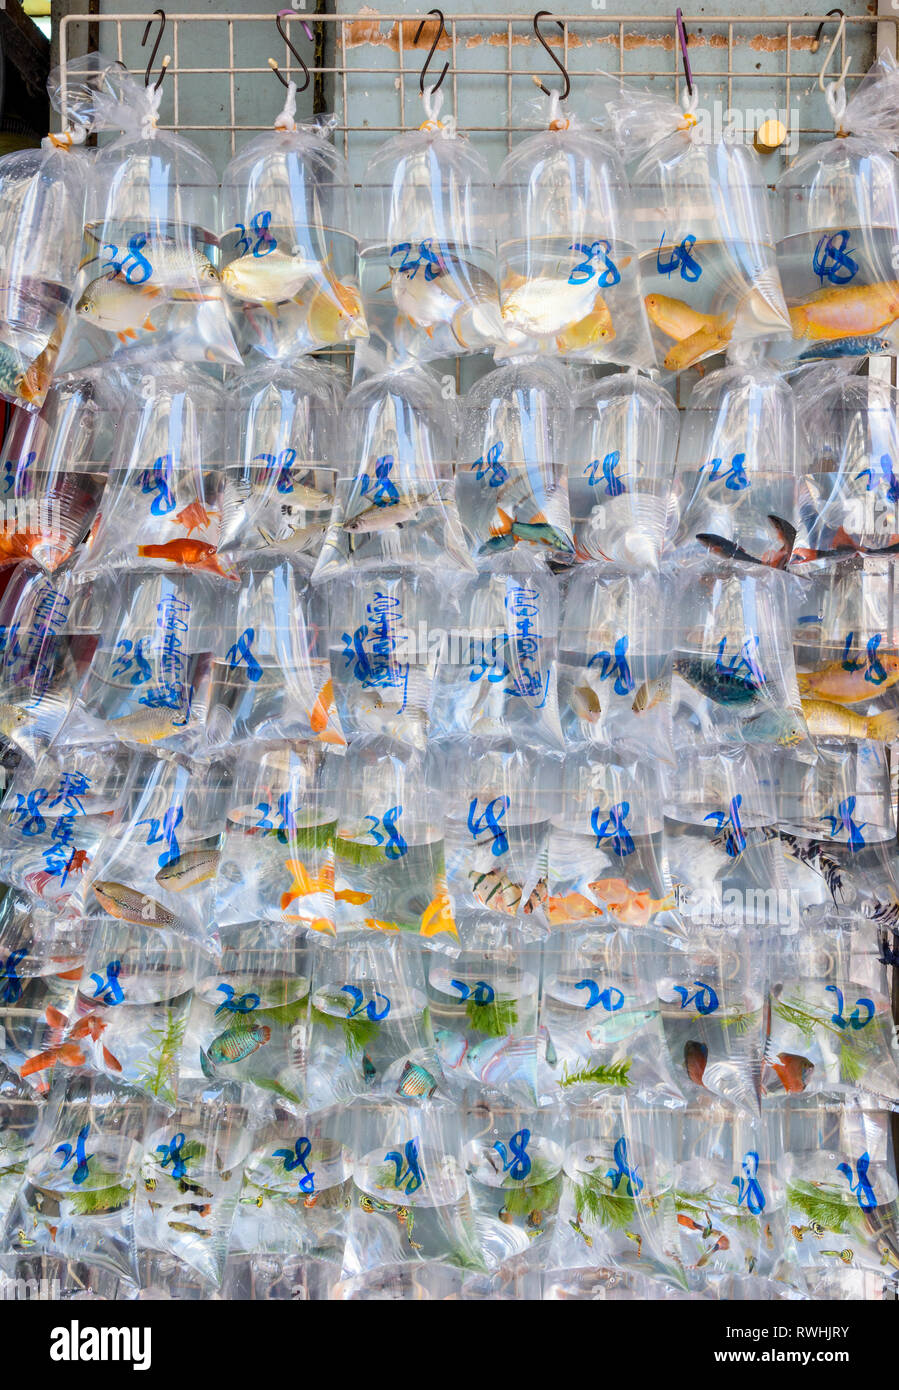 Hanging bags with live fish outside a shop in the goldfish market along Tung Choi Street, Mong Kok, Hong Kong Stock Photo